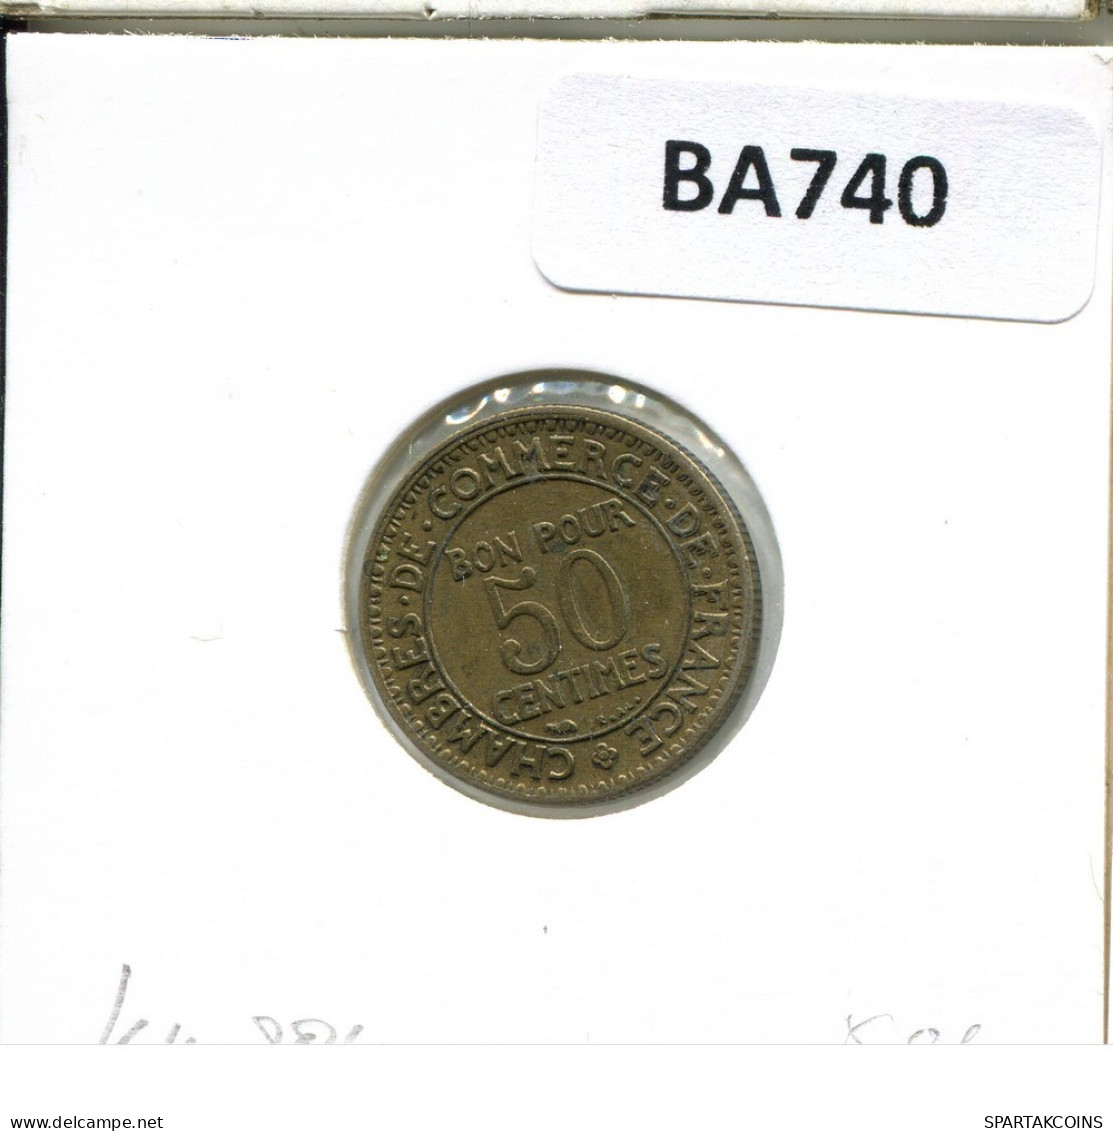 50 CENTIMES 1924 FRANCE French Coin #BA740.U.A - 50 Centimes